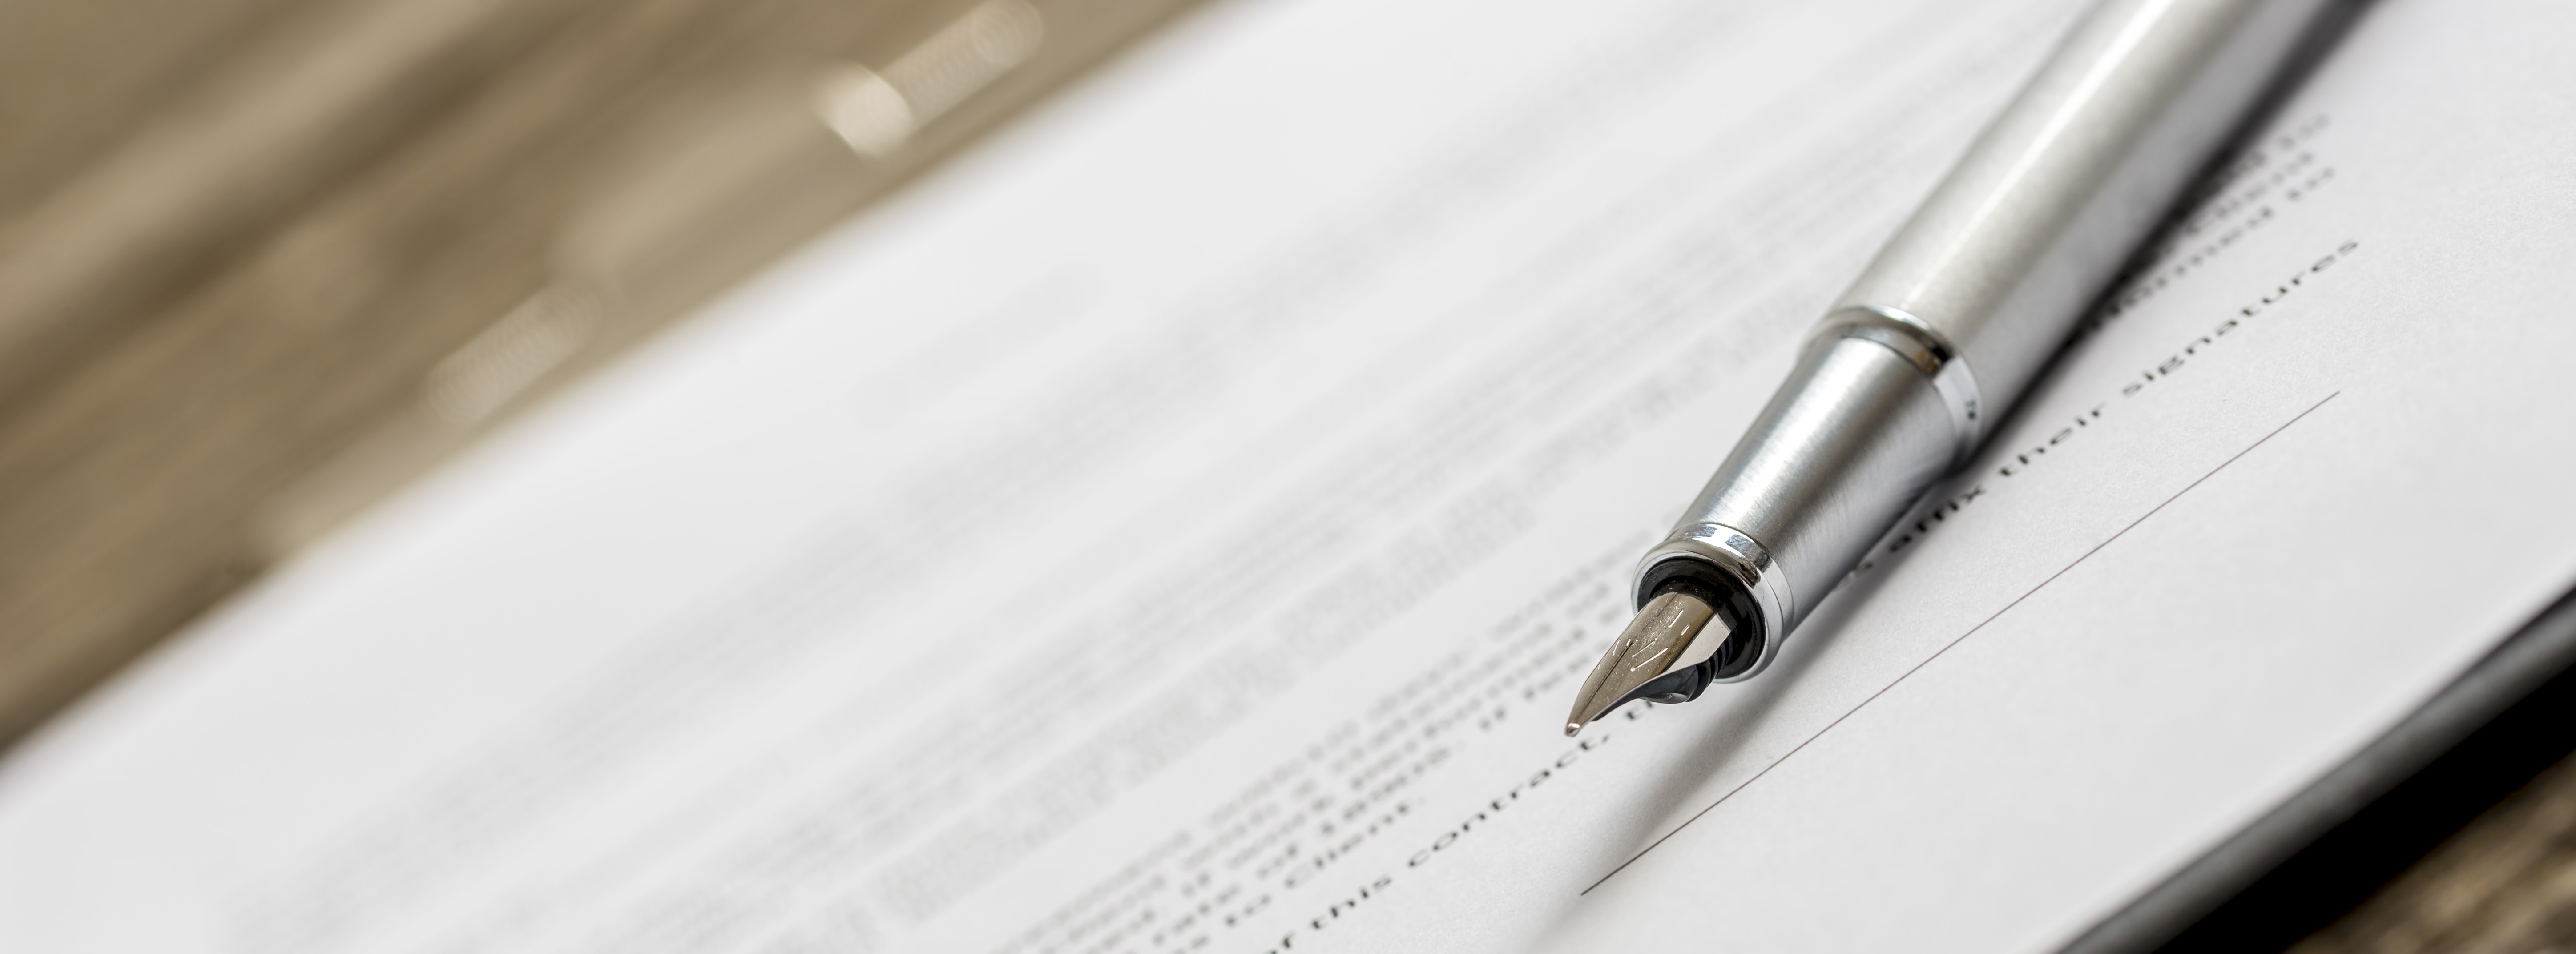 Restrictive Covenants and Nondisclosure Agreements